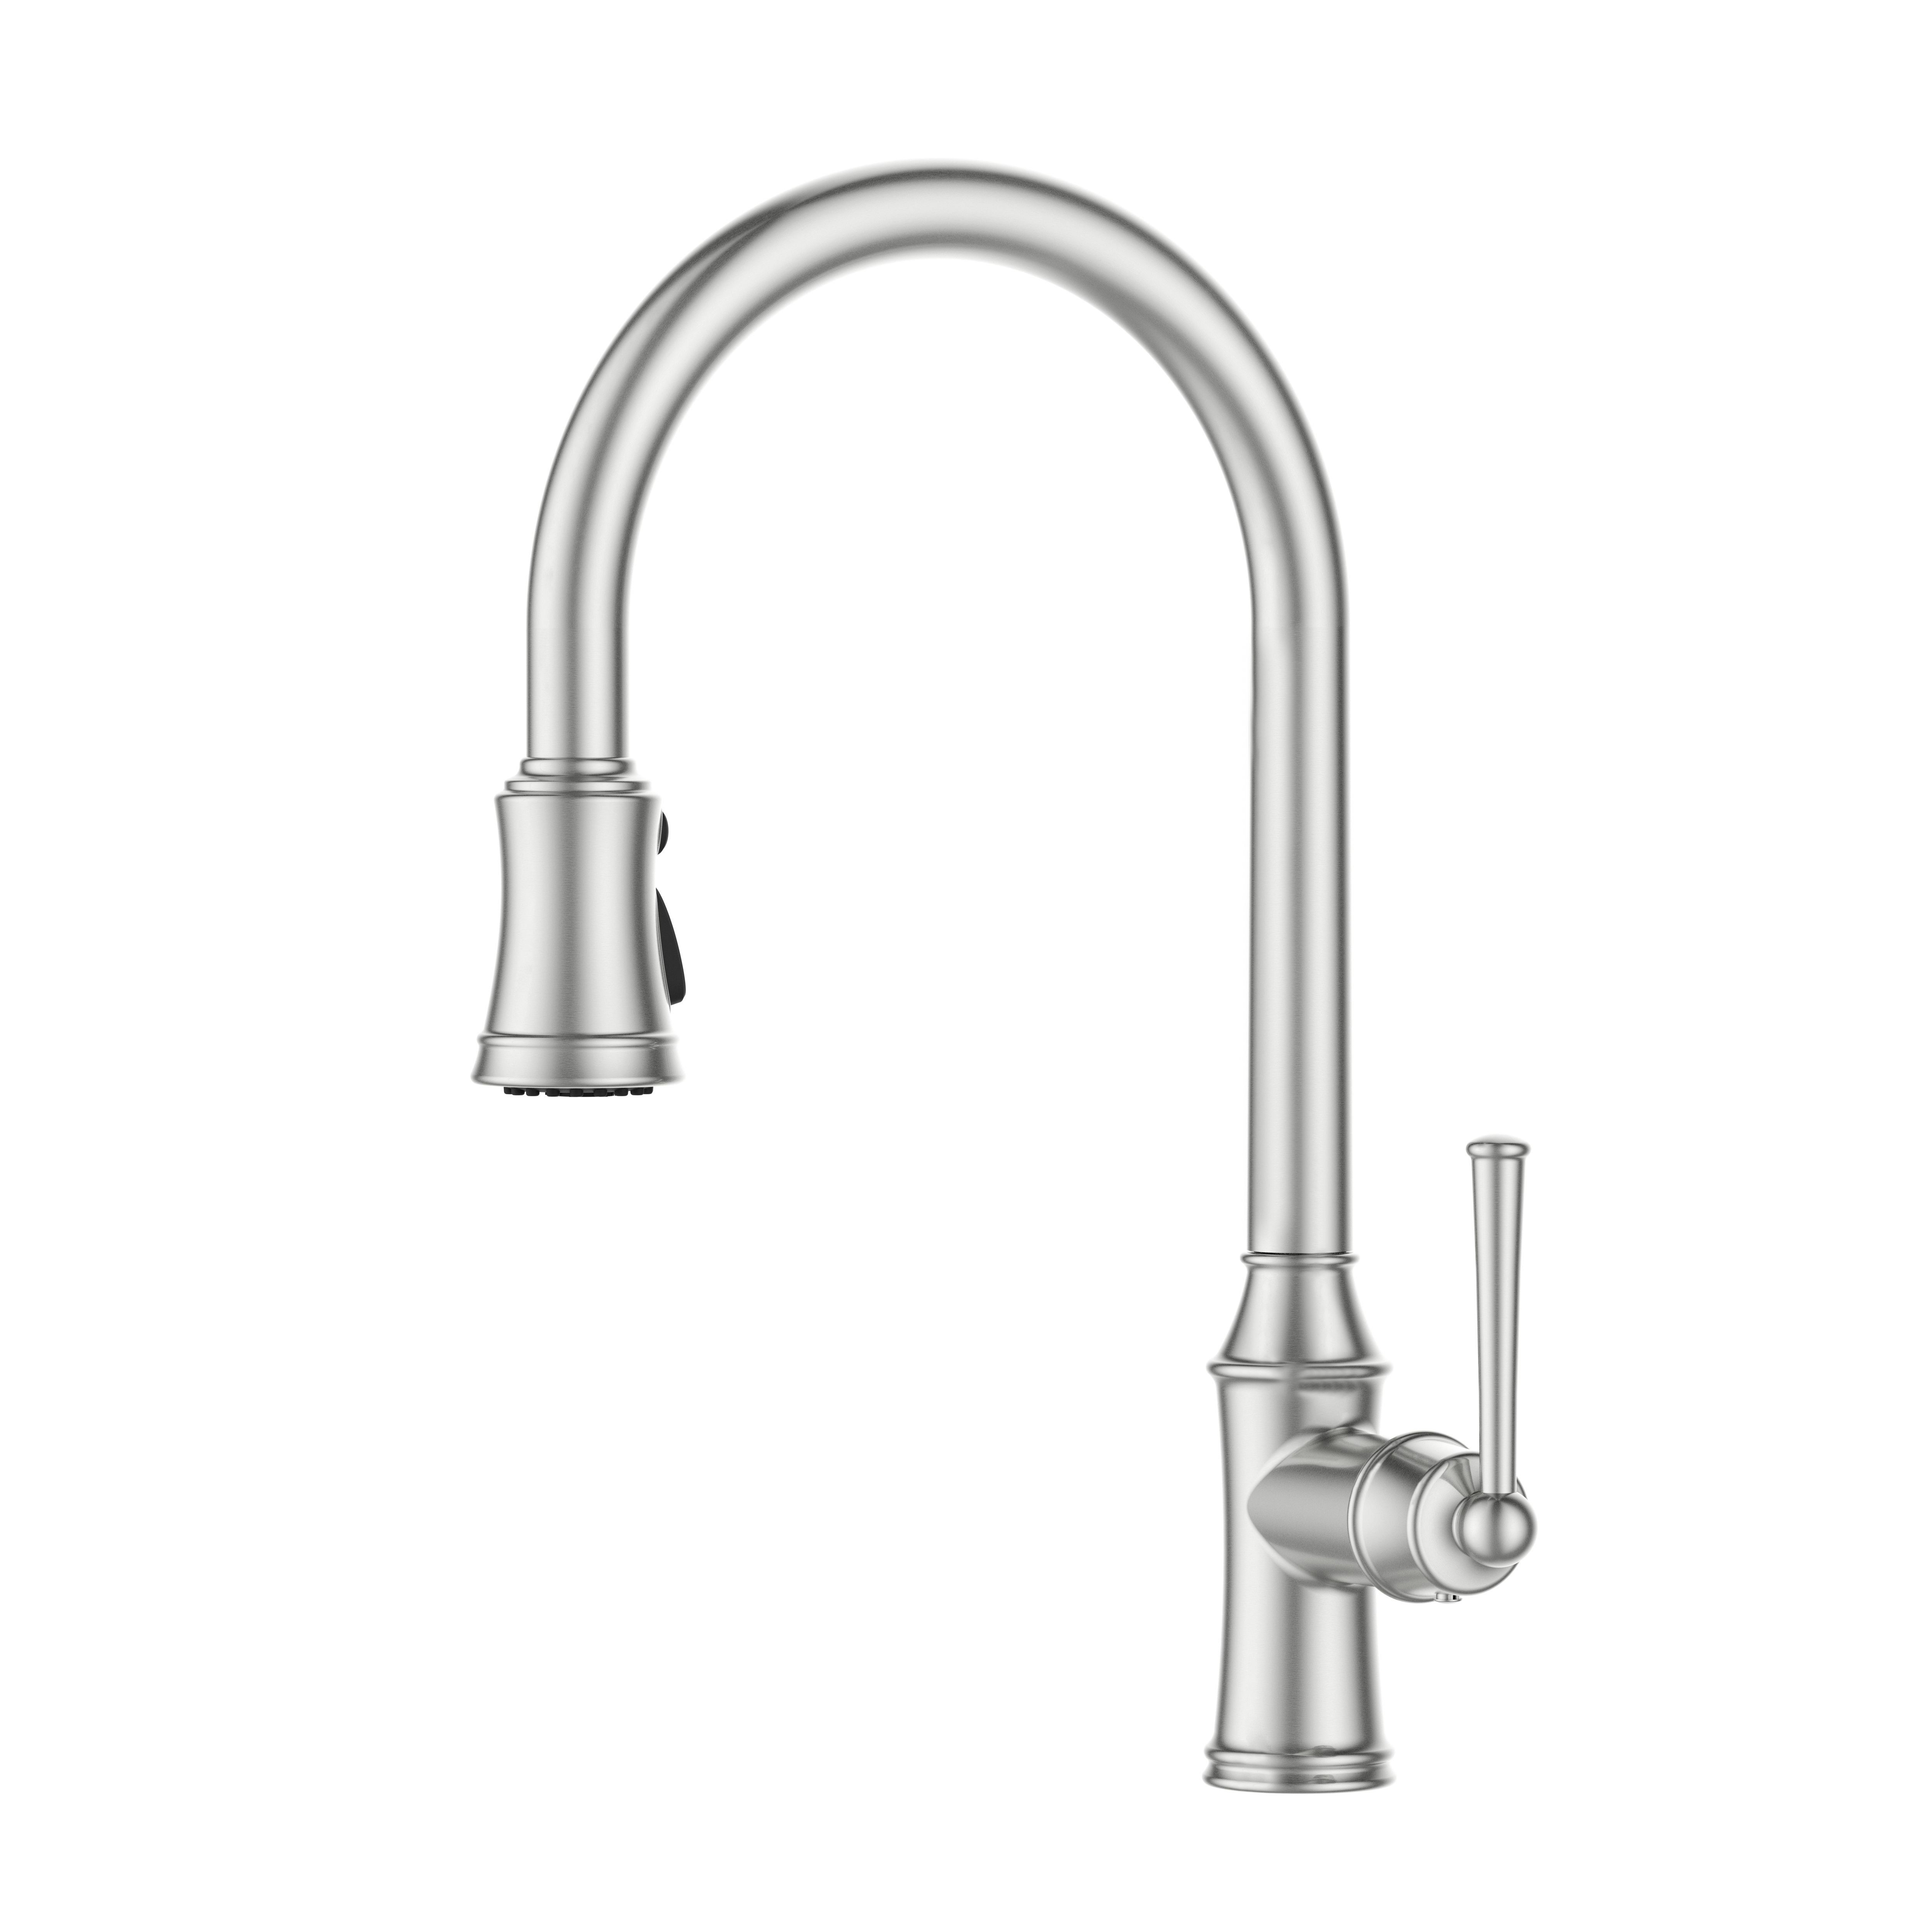  European Style Kitchen Faucet Classical Brushed Nickel 